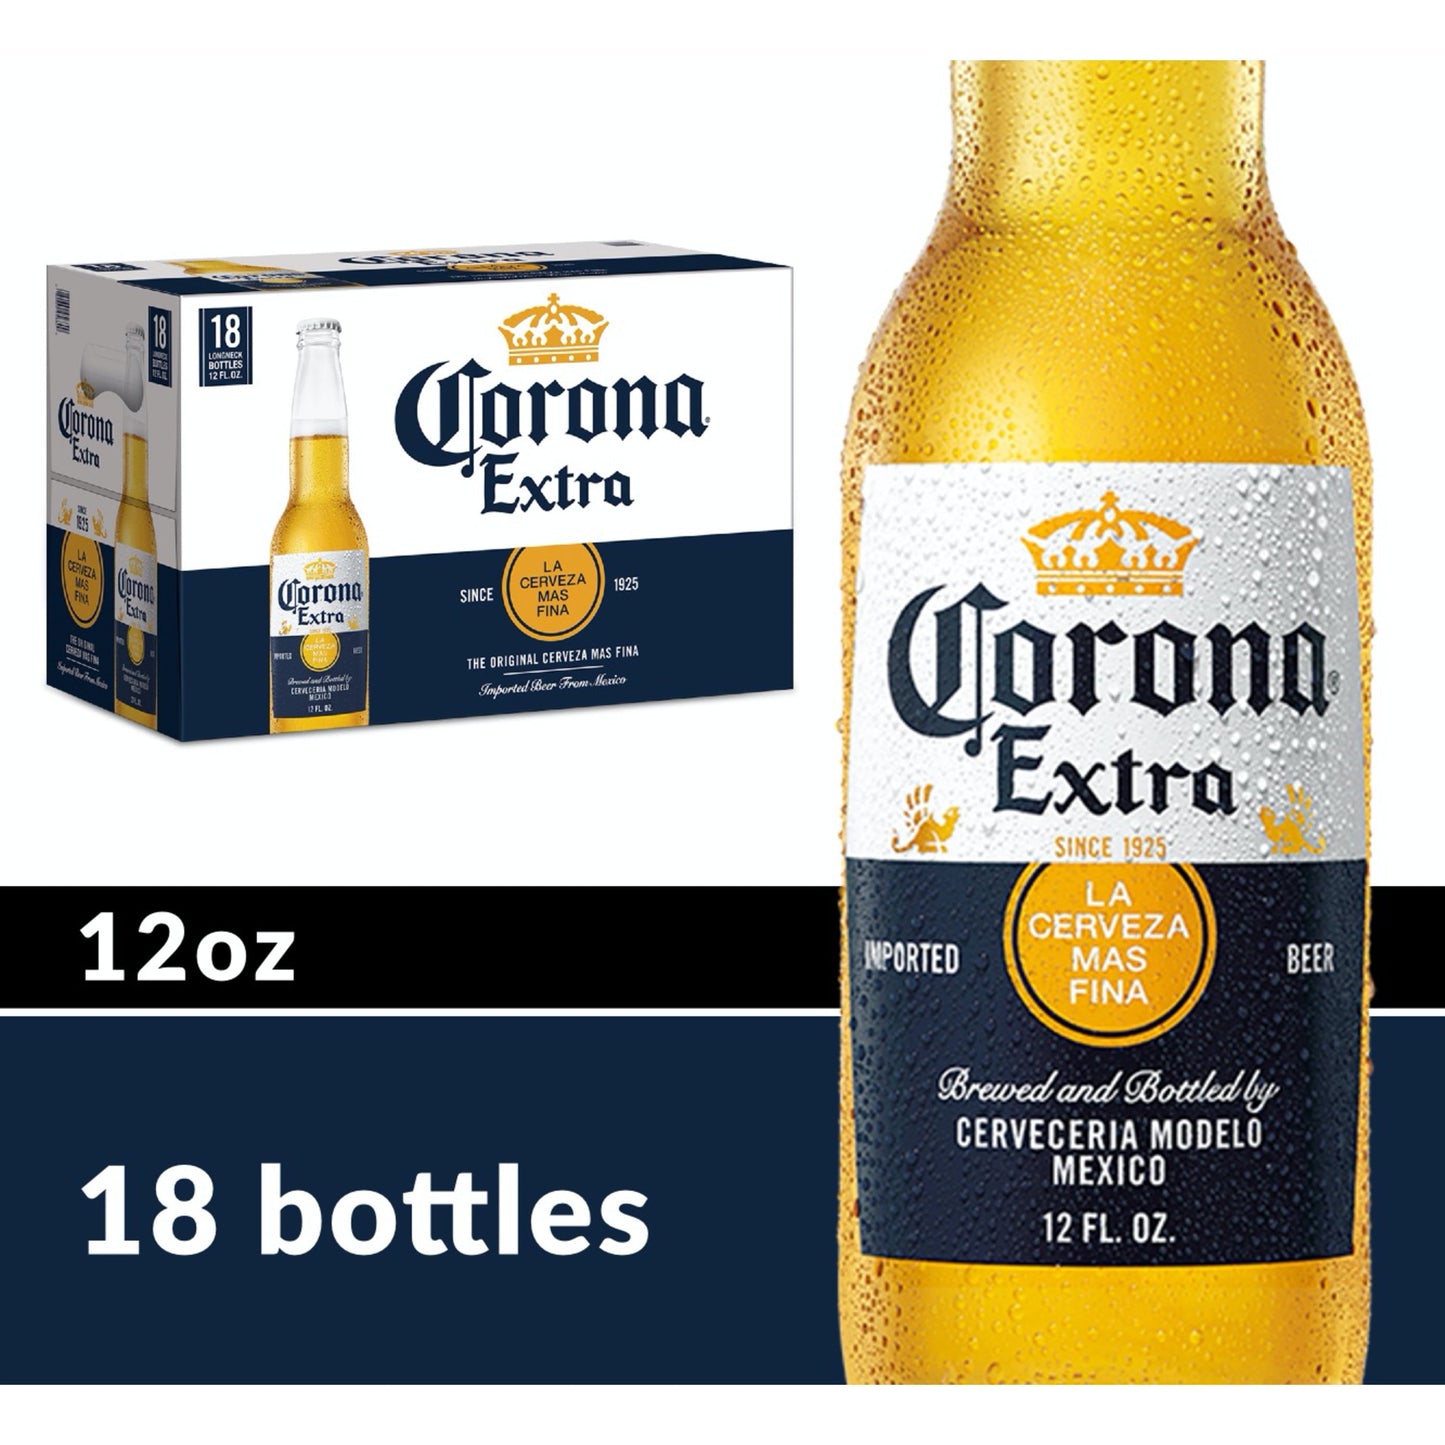 Corona Extra Mexican Lager Import Beer, 18 Pack Beer, 12 fl oz Bottles, 4.6% ABV